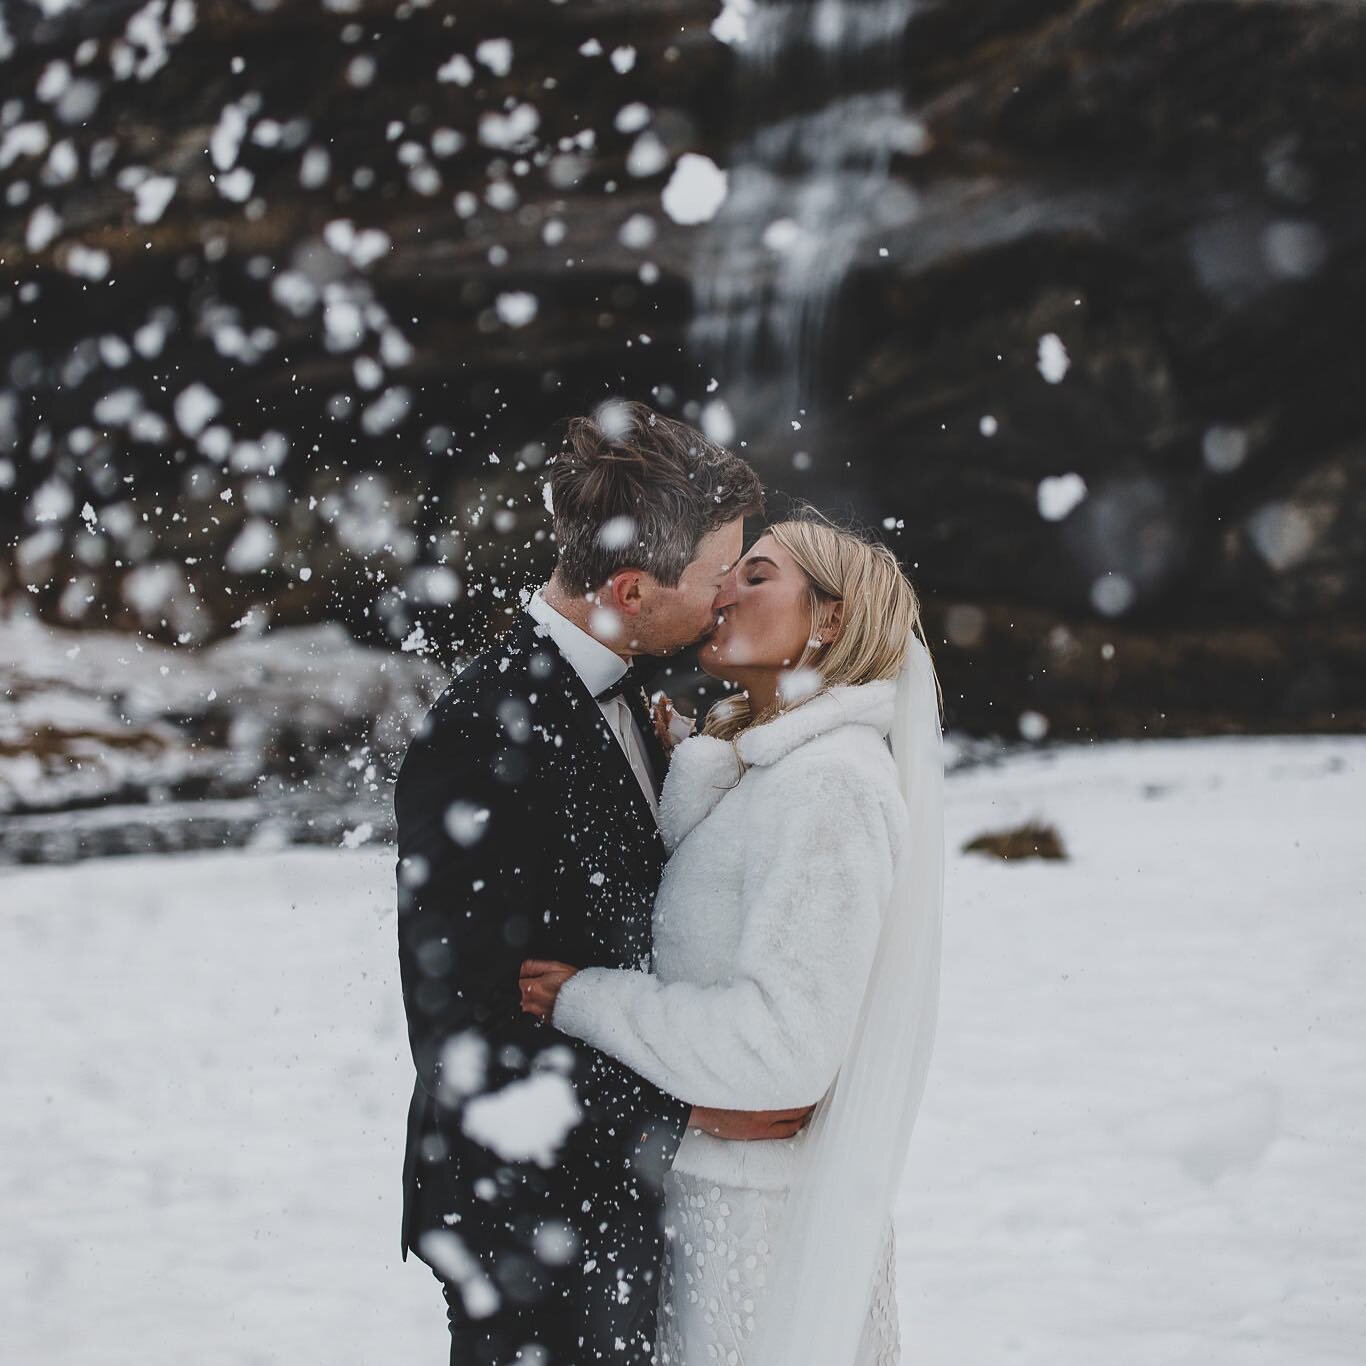 Excuse me, did you need someone to enthusiastically throw snow at the newlyweds for a nice photo&hellip;? 

SIGN ME UP! #notjustacelebrant

Kerri &amp; Rob, finishing off an epic adventure with a quick kiss in the snow thanks to @williamsphotography_